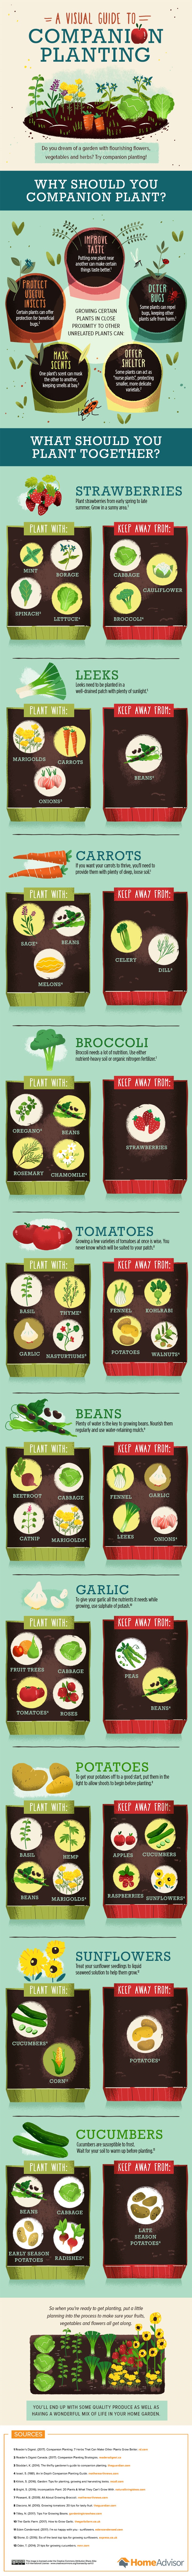 A visual Guide to Companion Planting Infographic